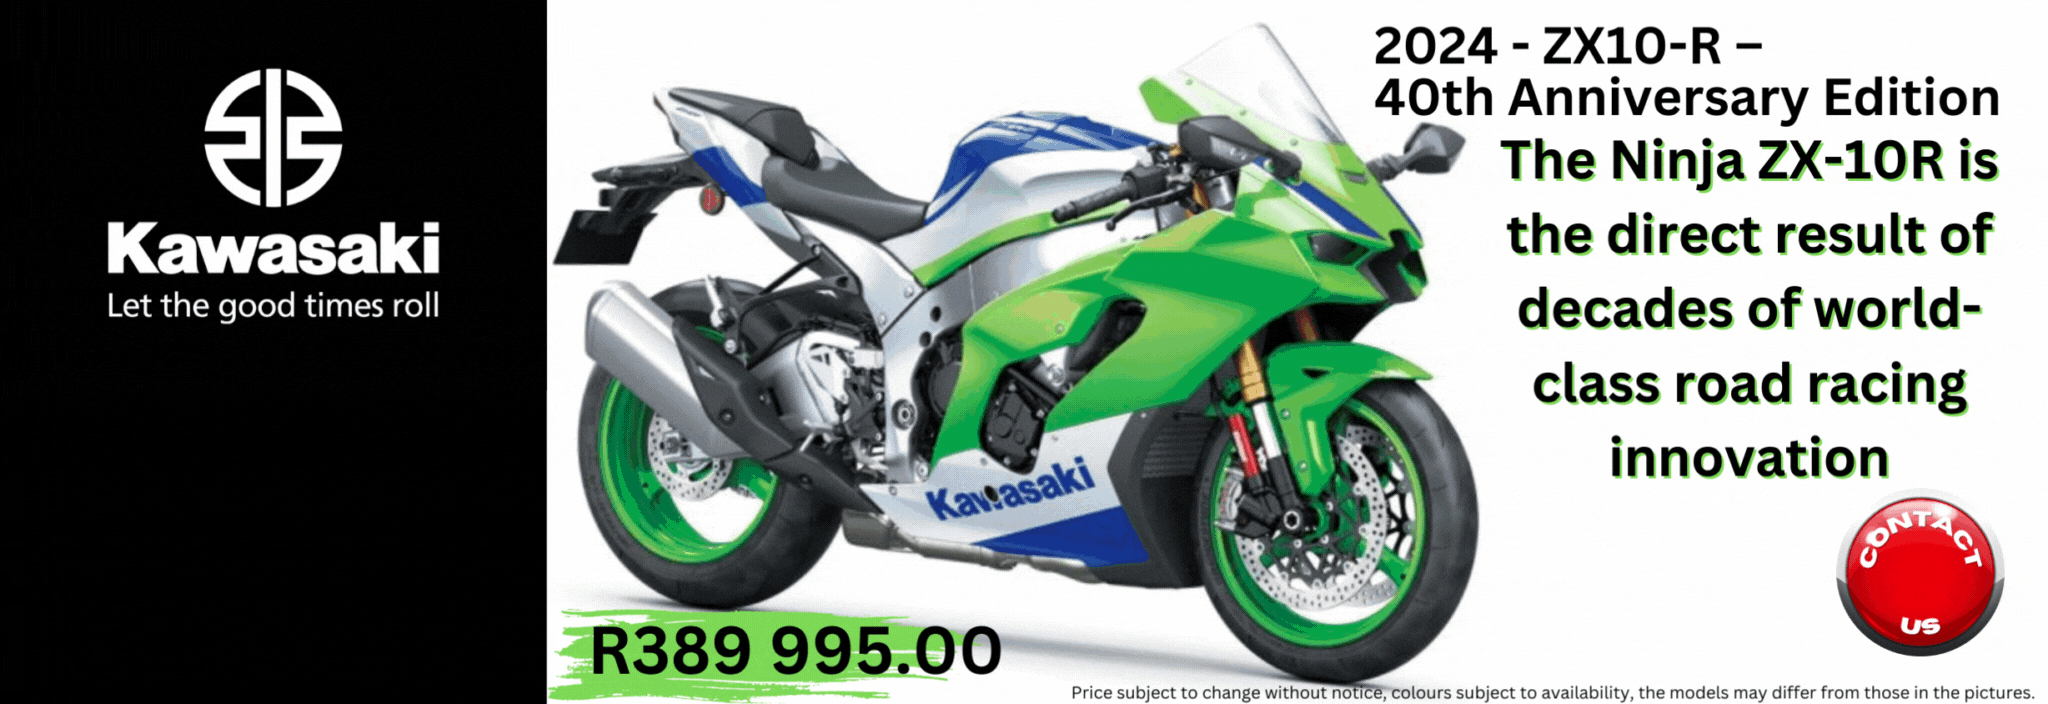 KAWASAKI MOTORCYCLES PARTS ACCESSORIES TECHNICAL SOUTH AFRICA SOUTHERN AFRICA